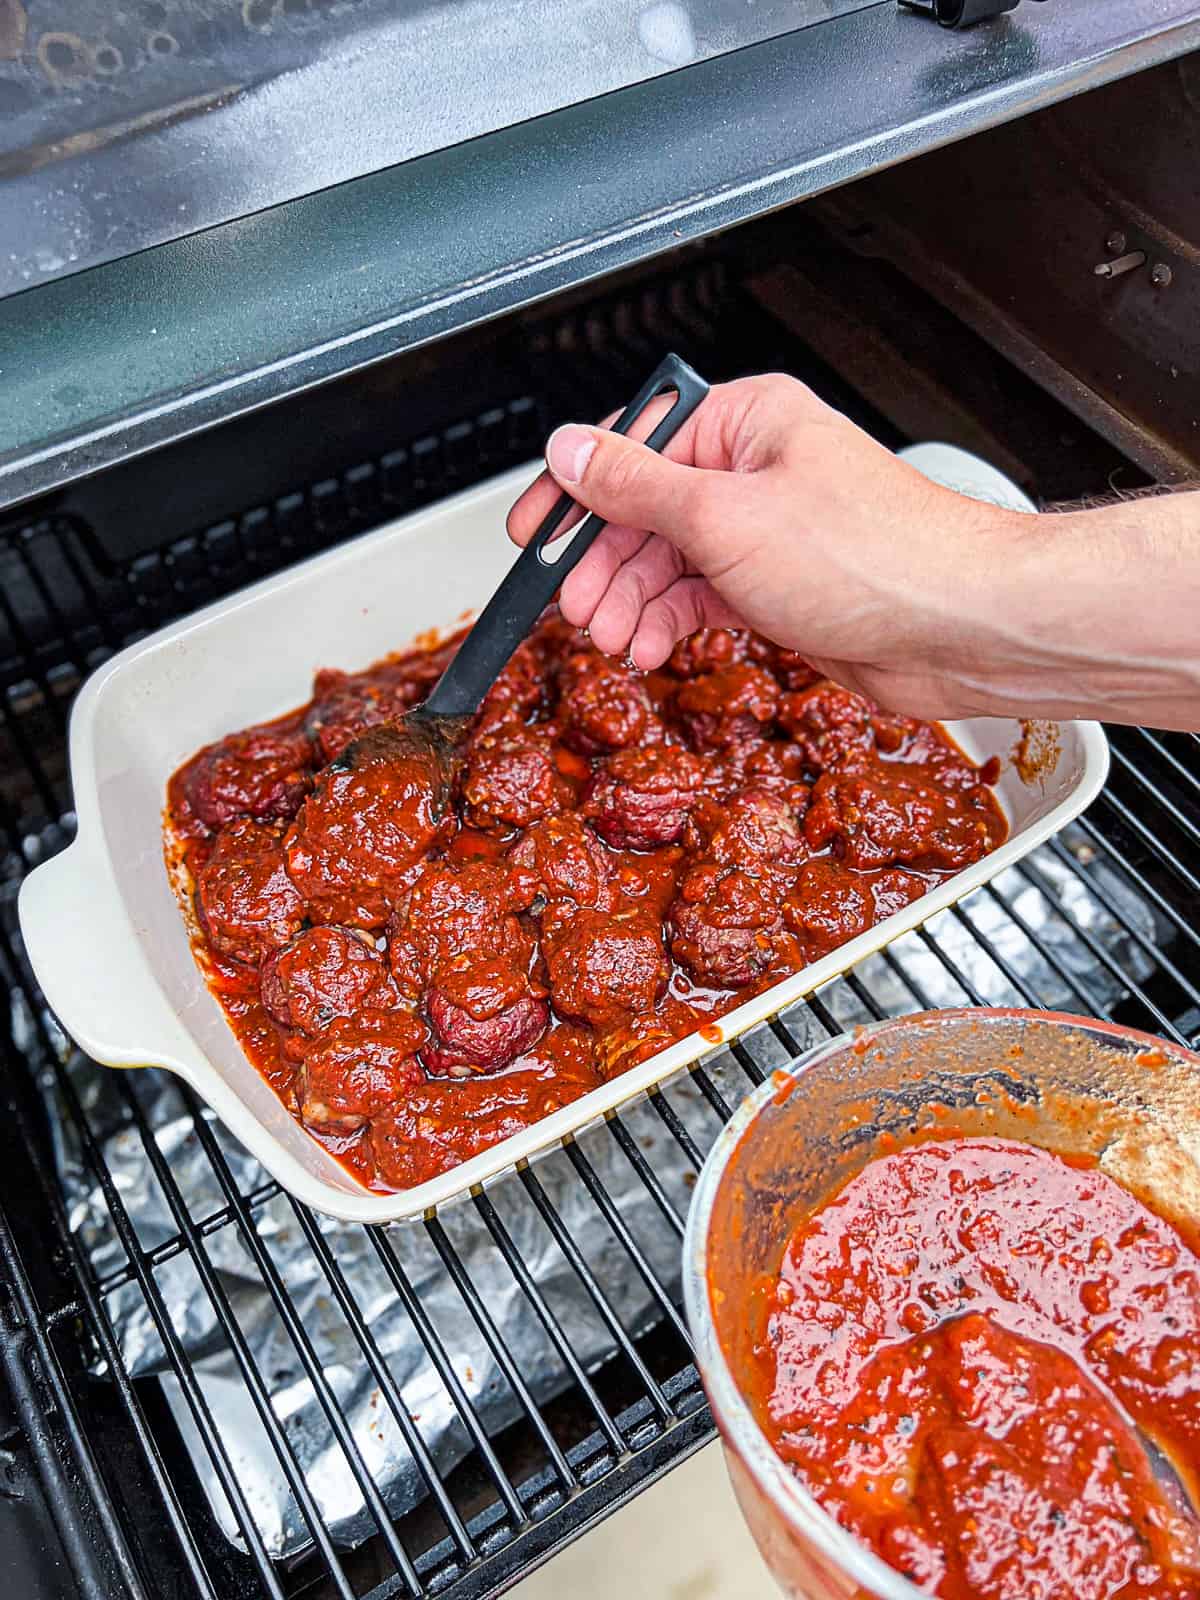 Adding pasta sauce to Traeger Meatballs smoked low and slow